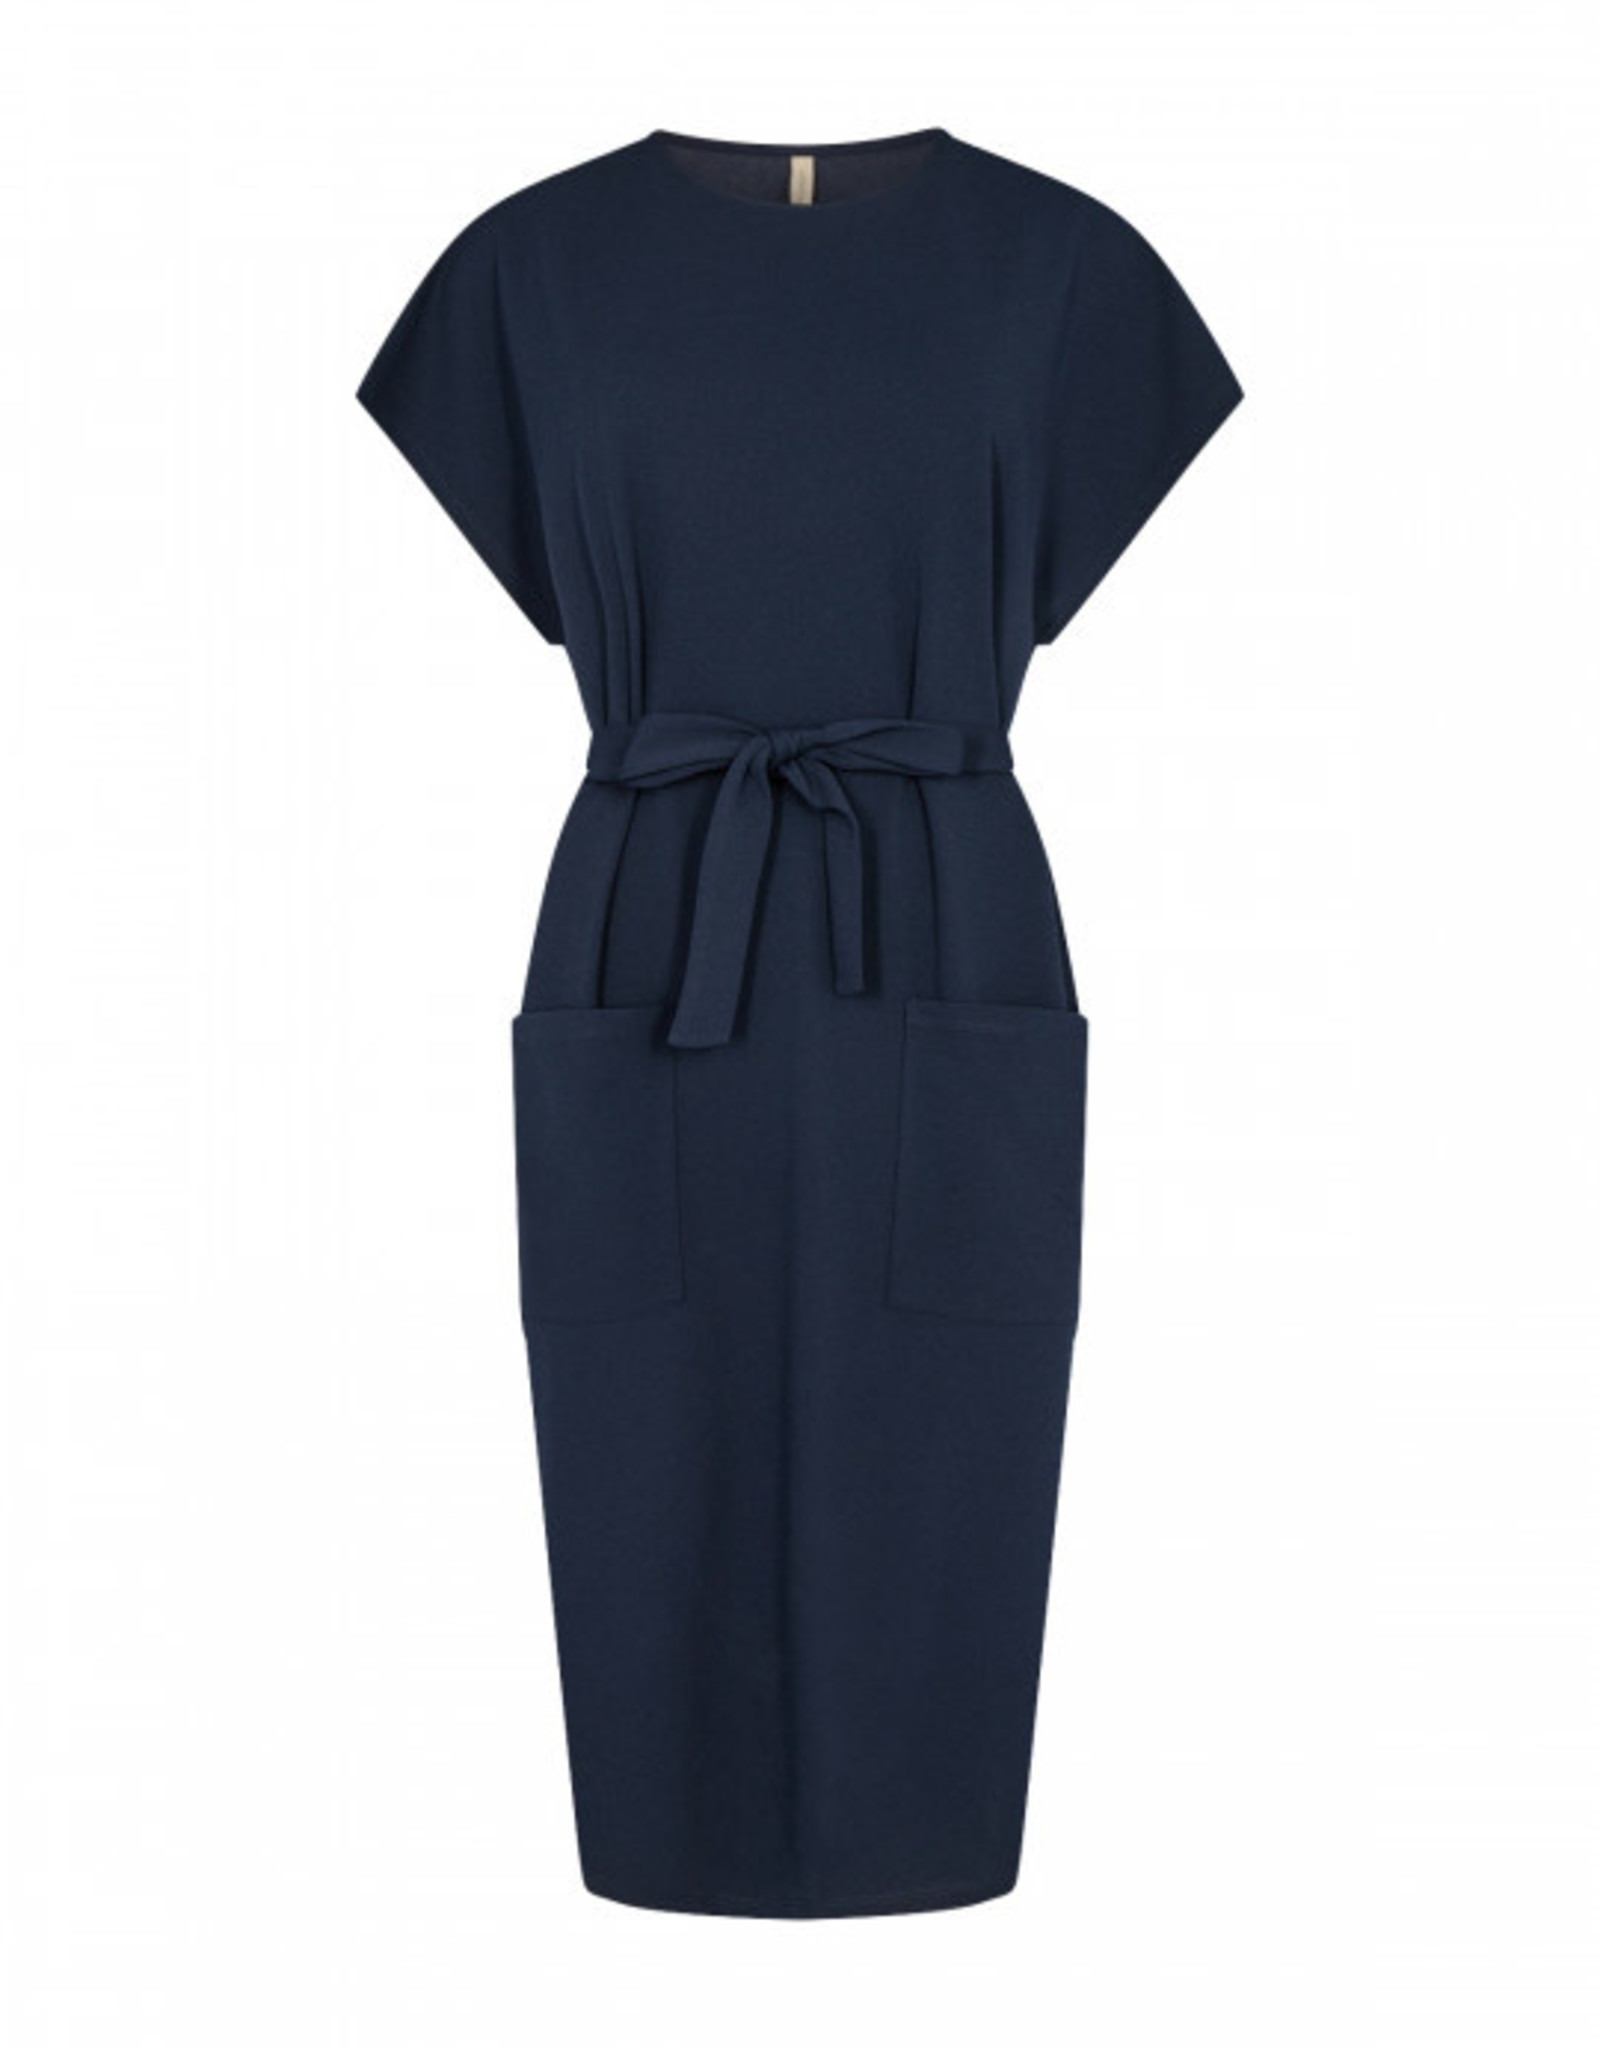 Soya Concept Soya Concept Siham 37 Cap Sleeve Dress with Round Neckline and Front Pockets